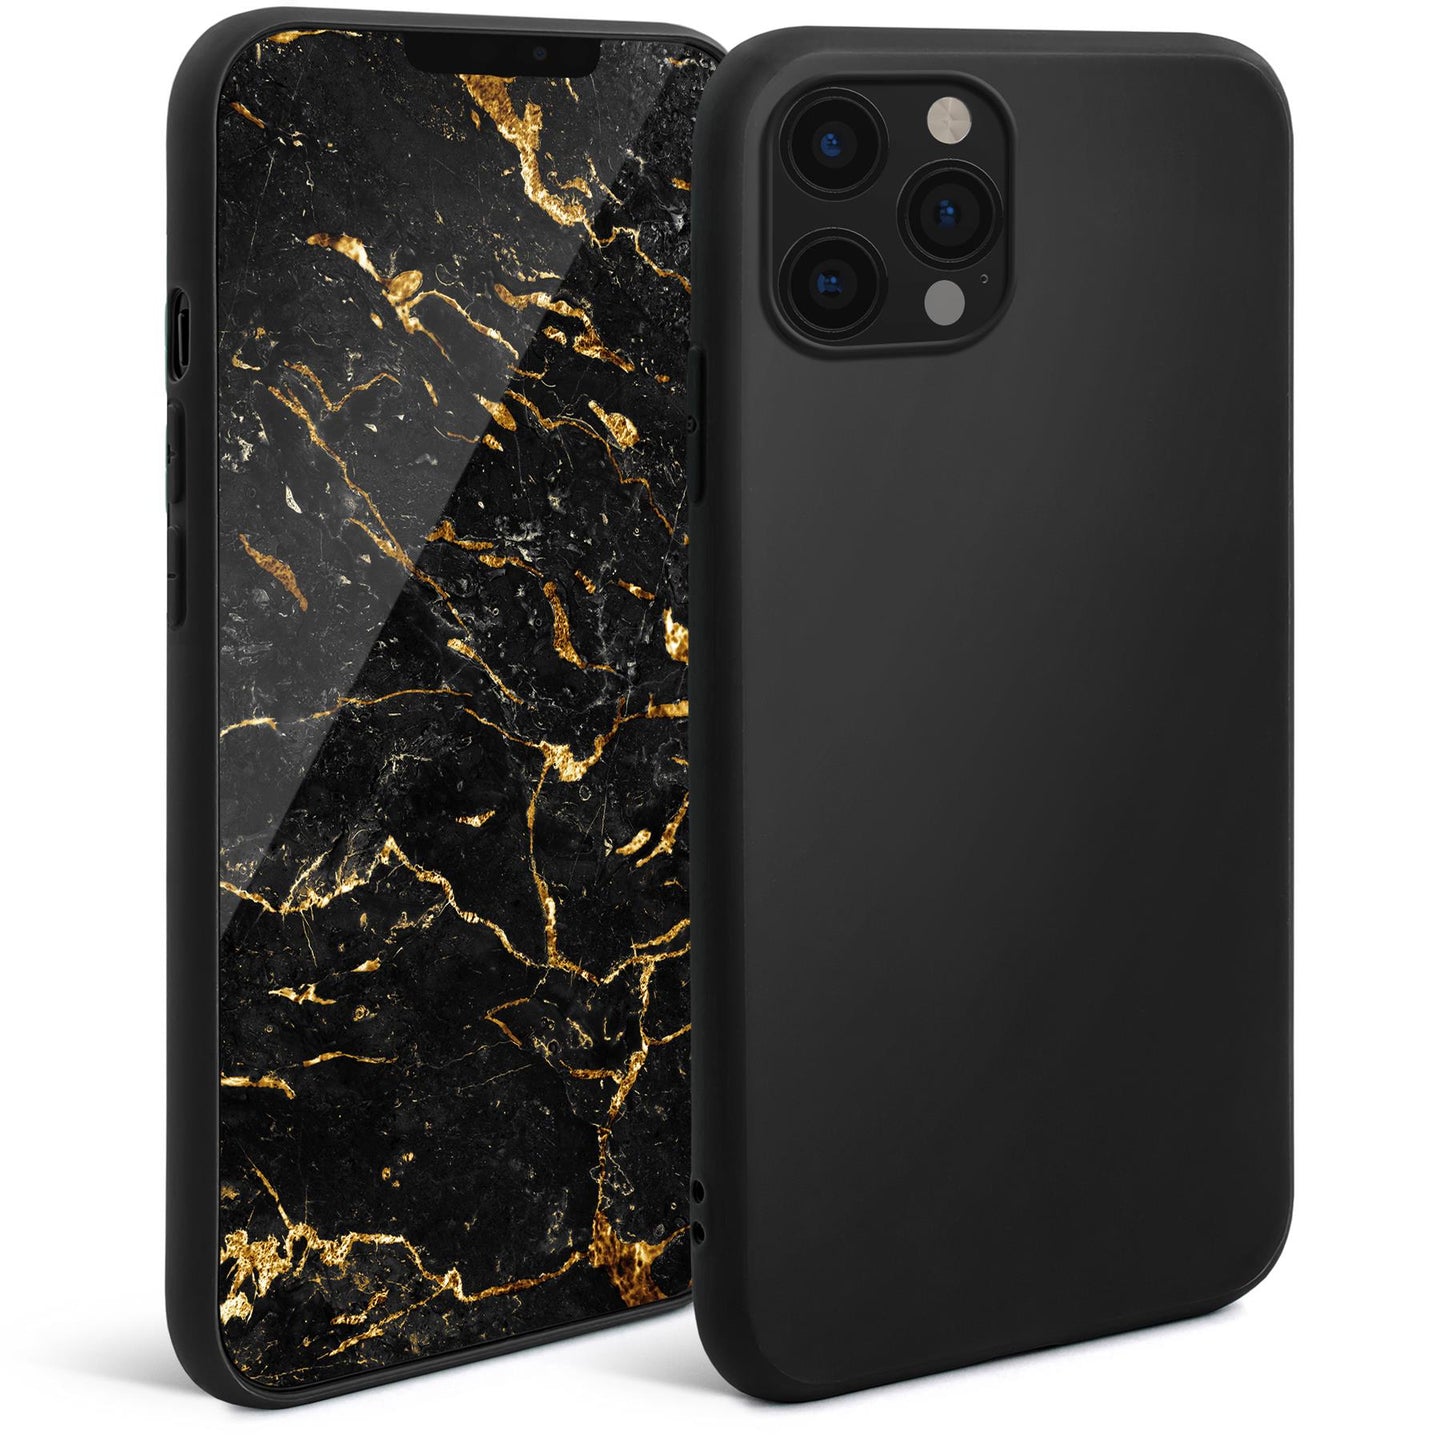 Moozy Minimalist Series Silicone Case for iPhone 12, iPhone 12 Pro, Black - Matte Finish Slim Soft TPU Cover